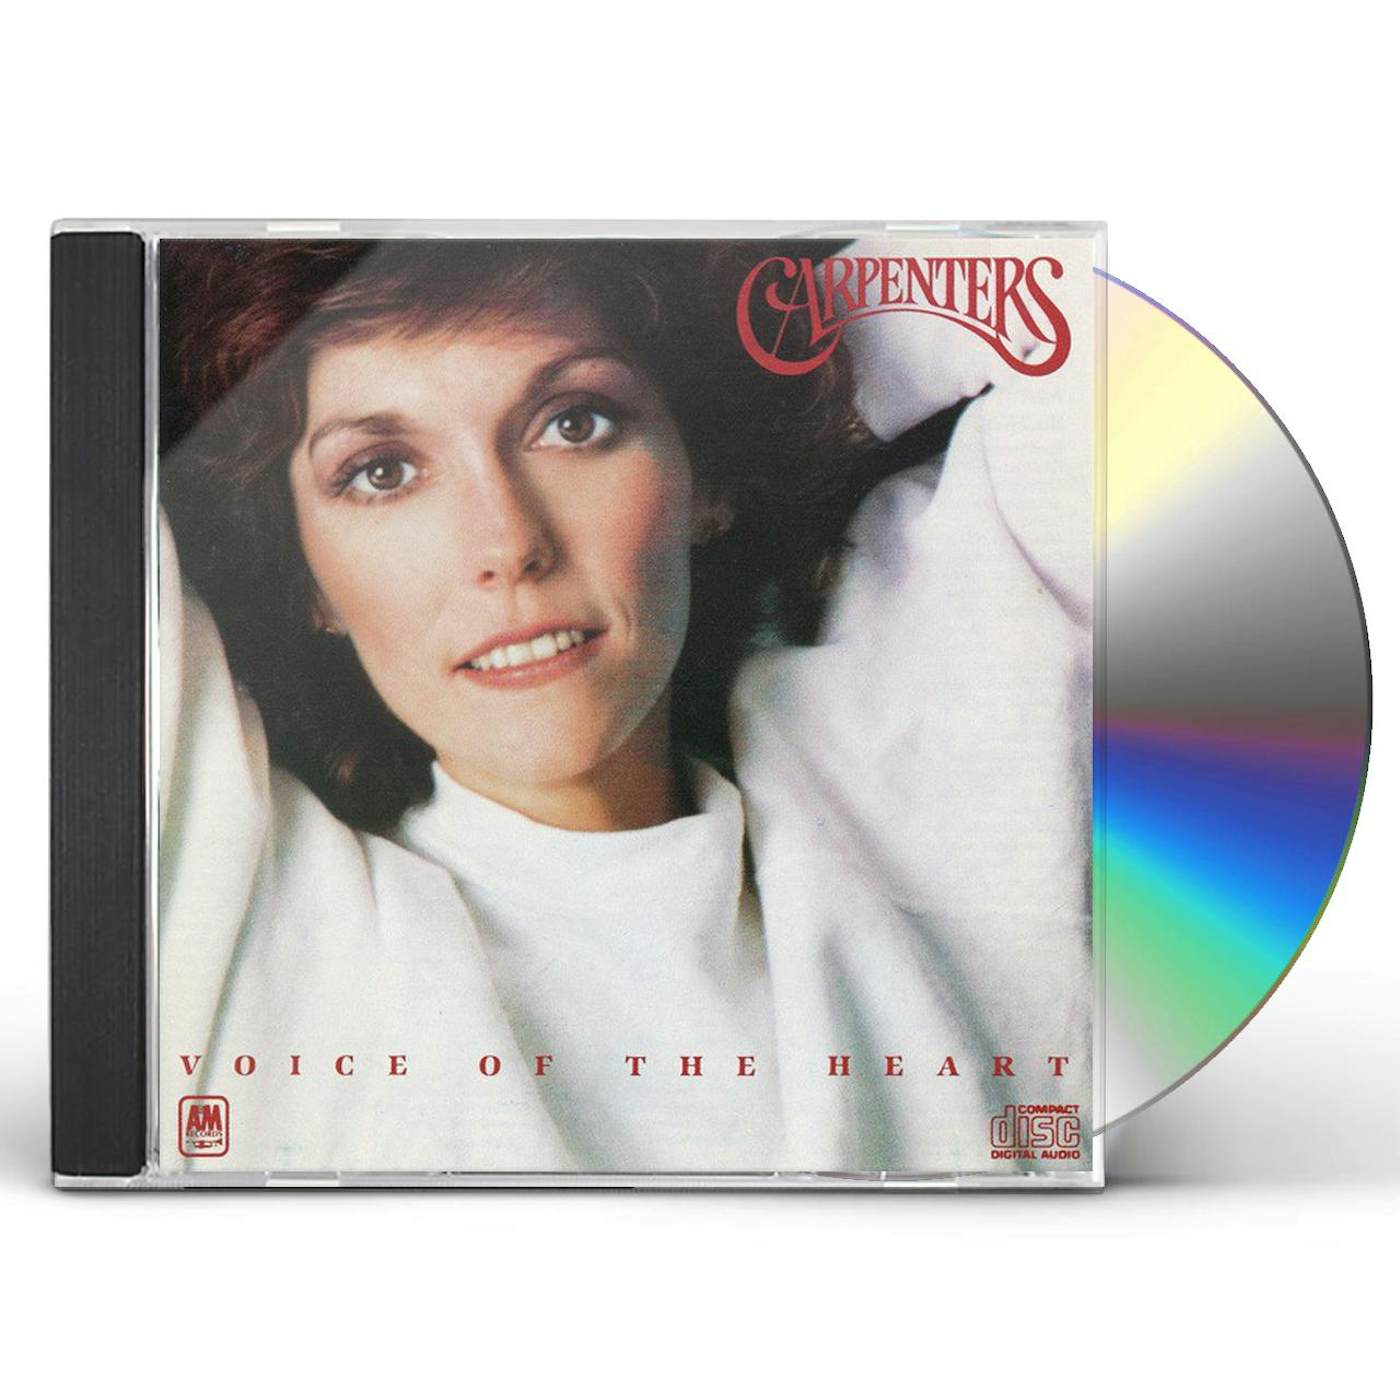 Carpenters VOICE OF THE HEART CD